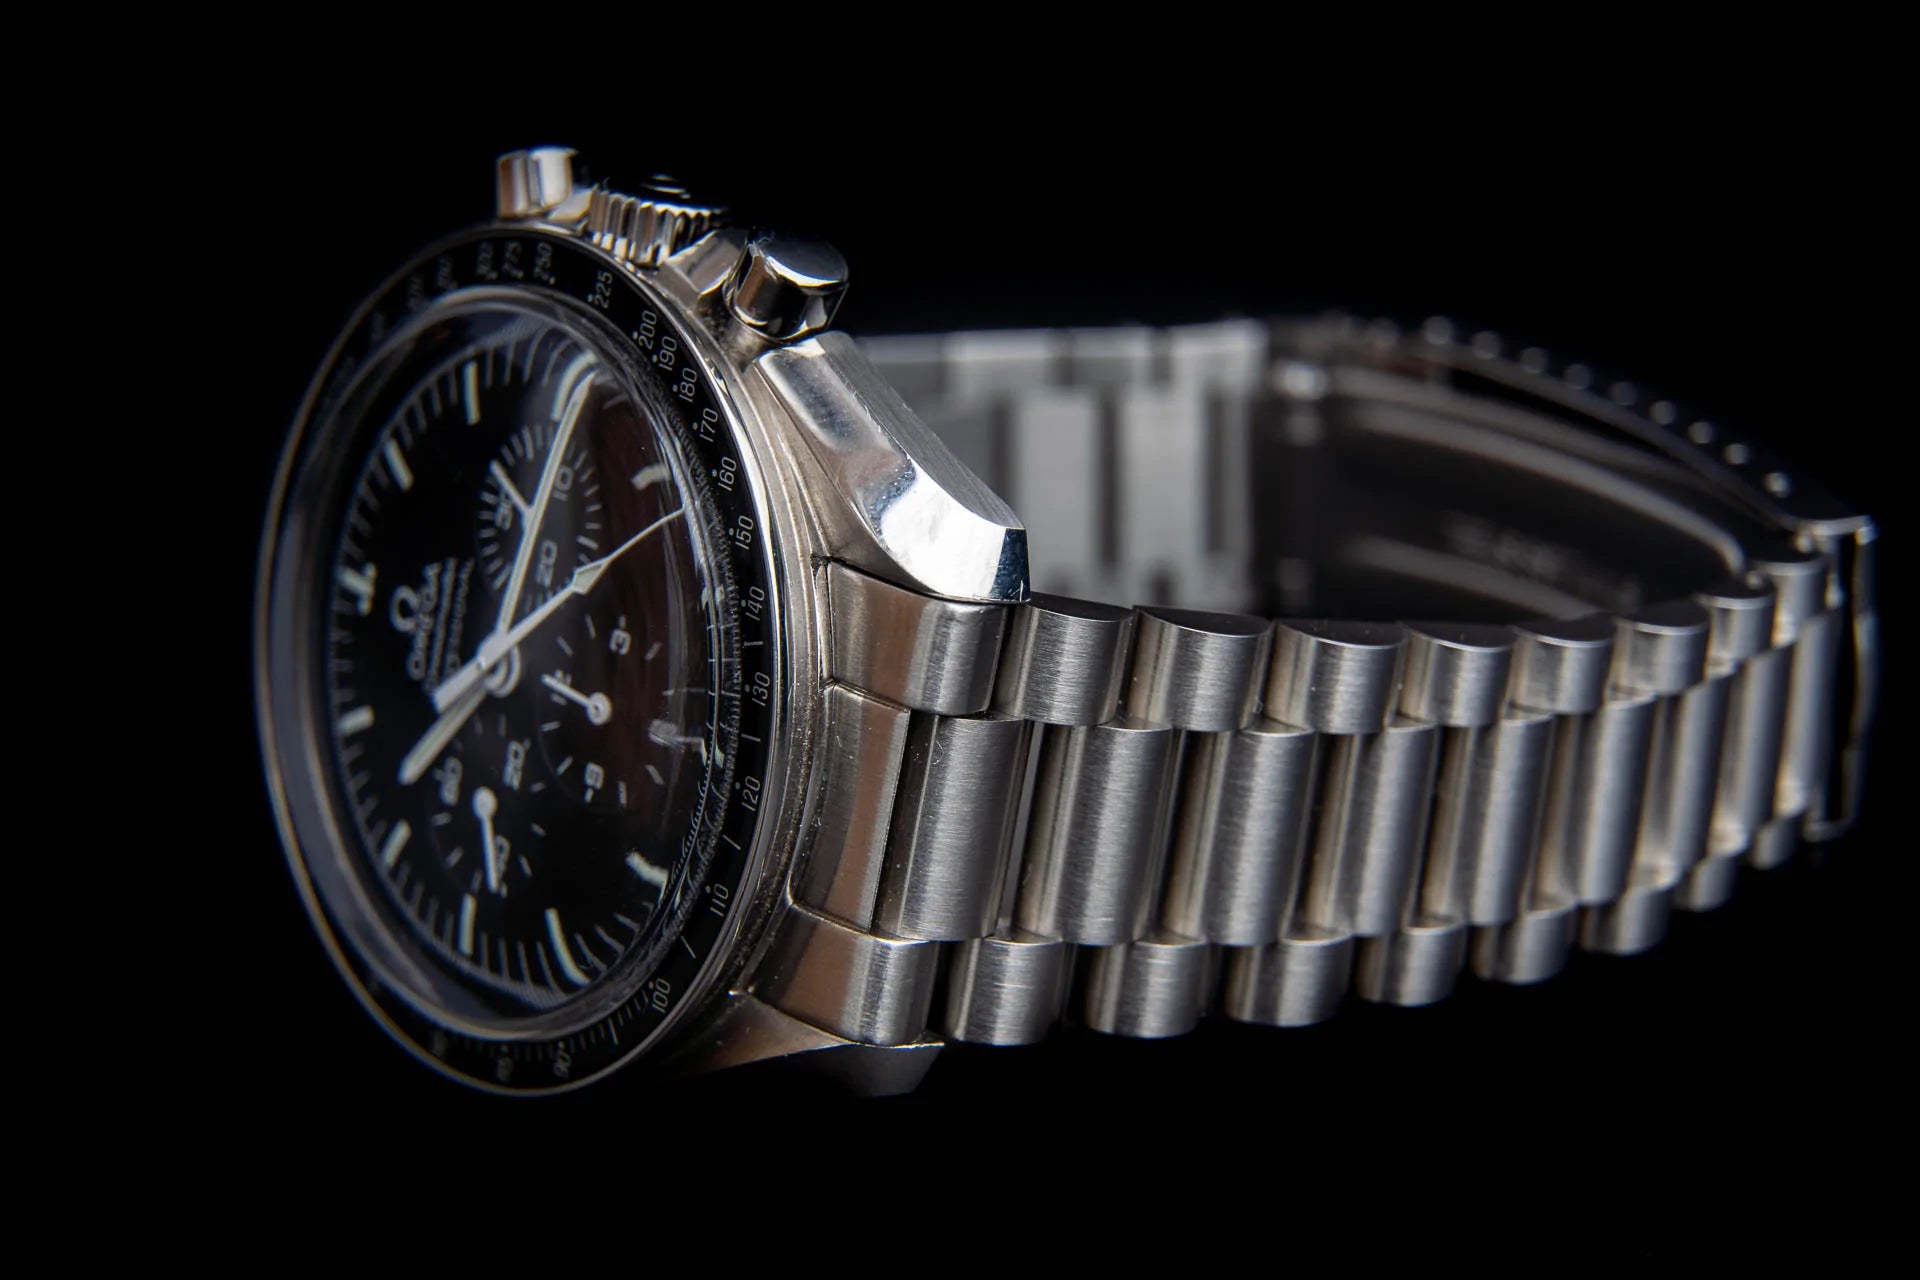 US 1450 Lincoln for the Speedmaster 20mm & 19mm